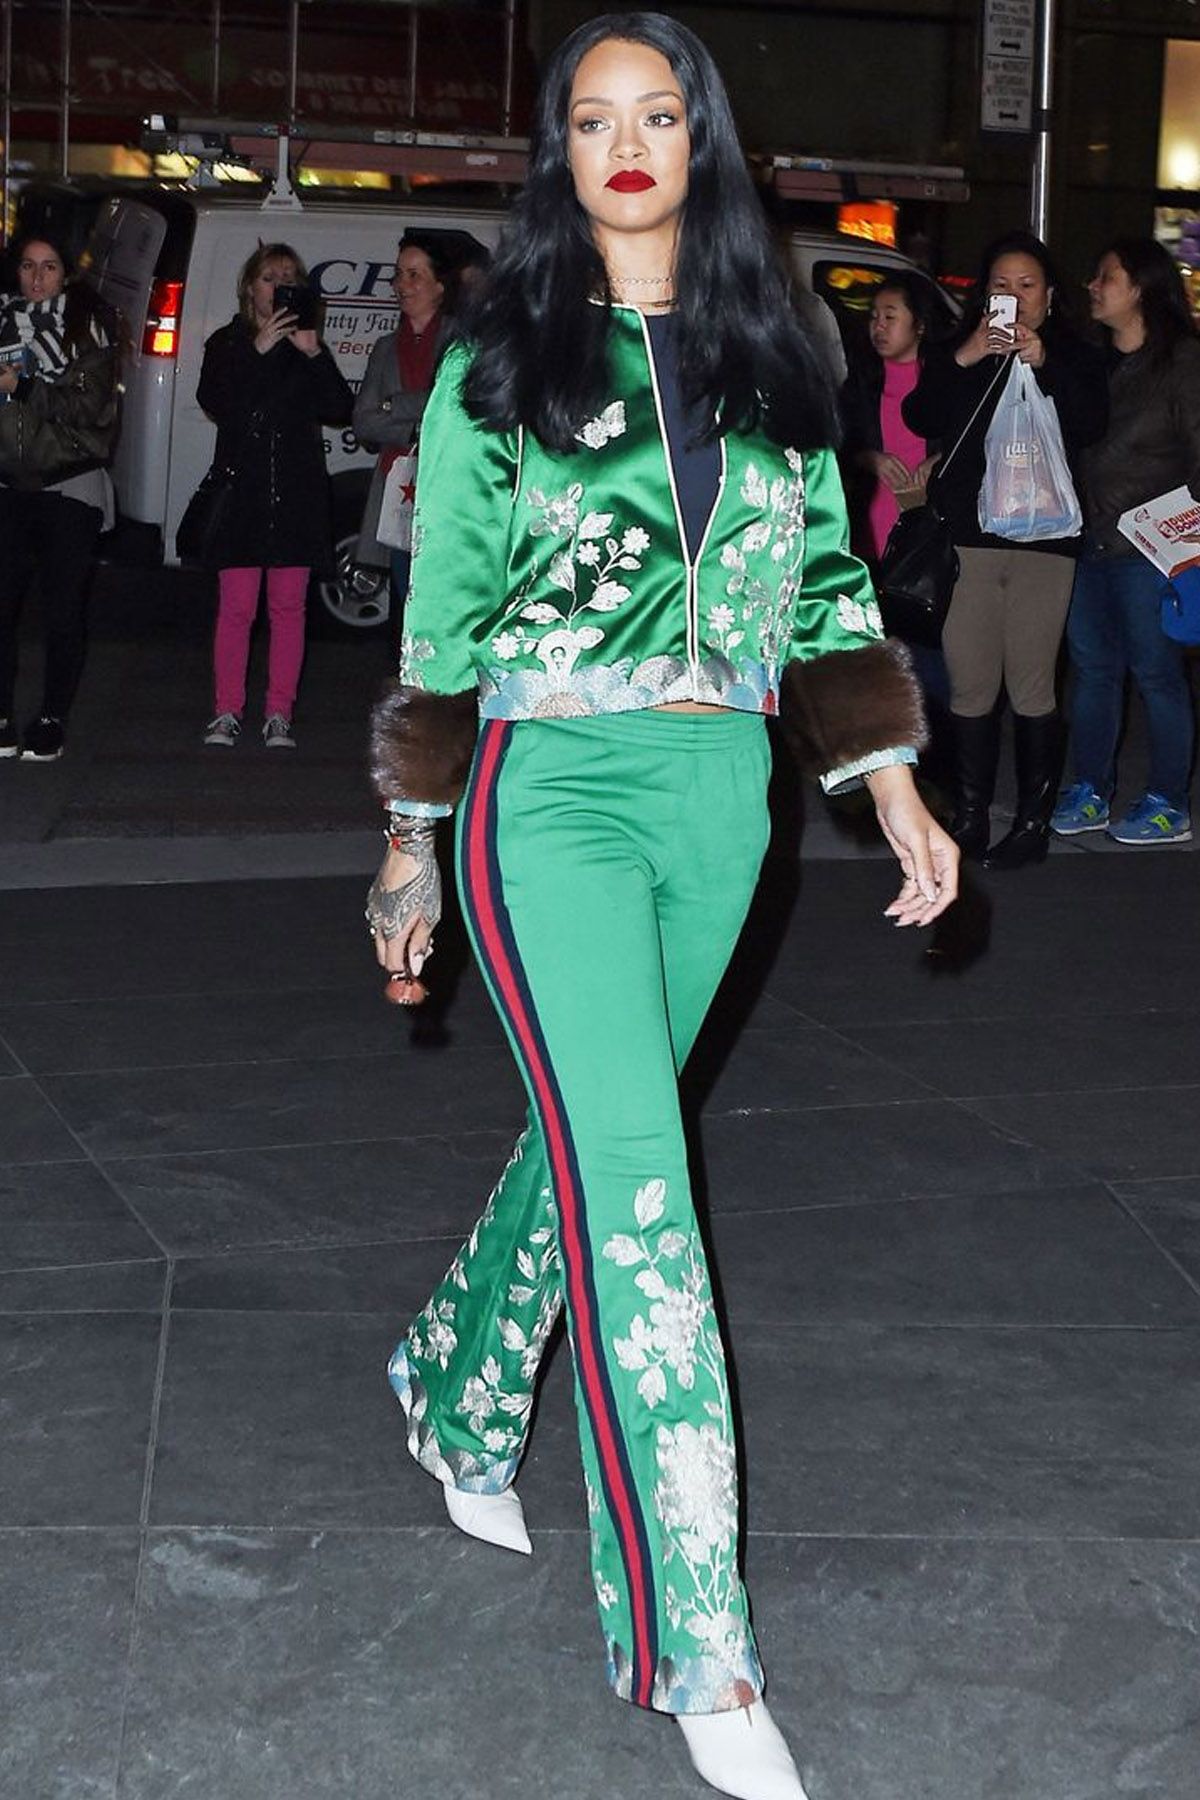 Tracksuit is Back!  Check out her Mix N Match Inspiration from Celebs